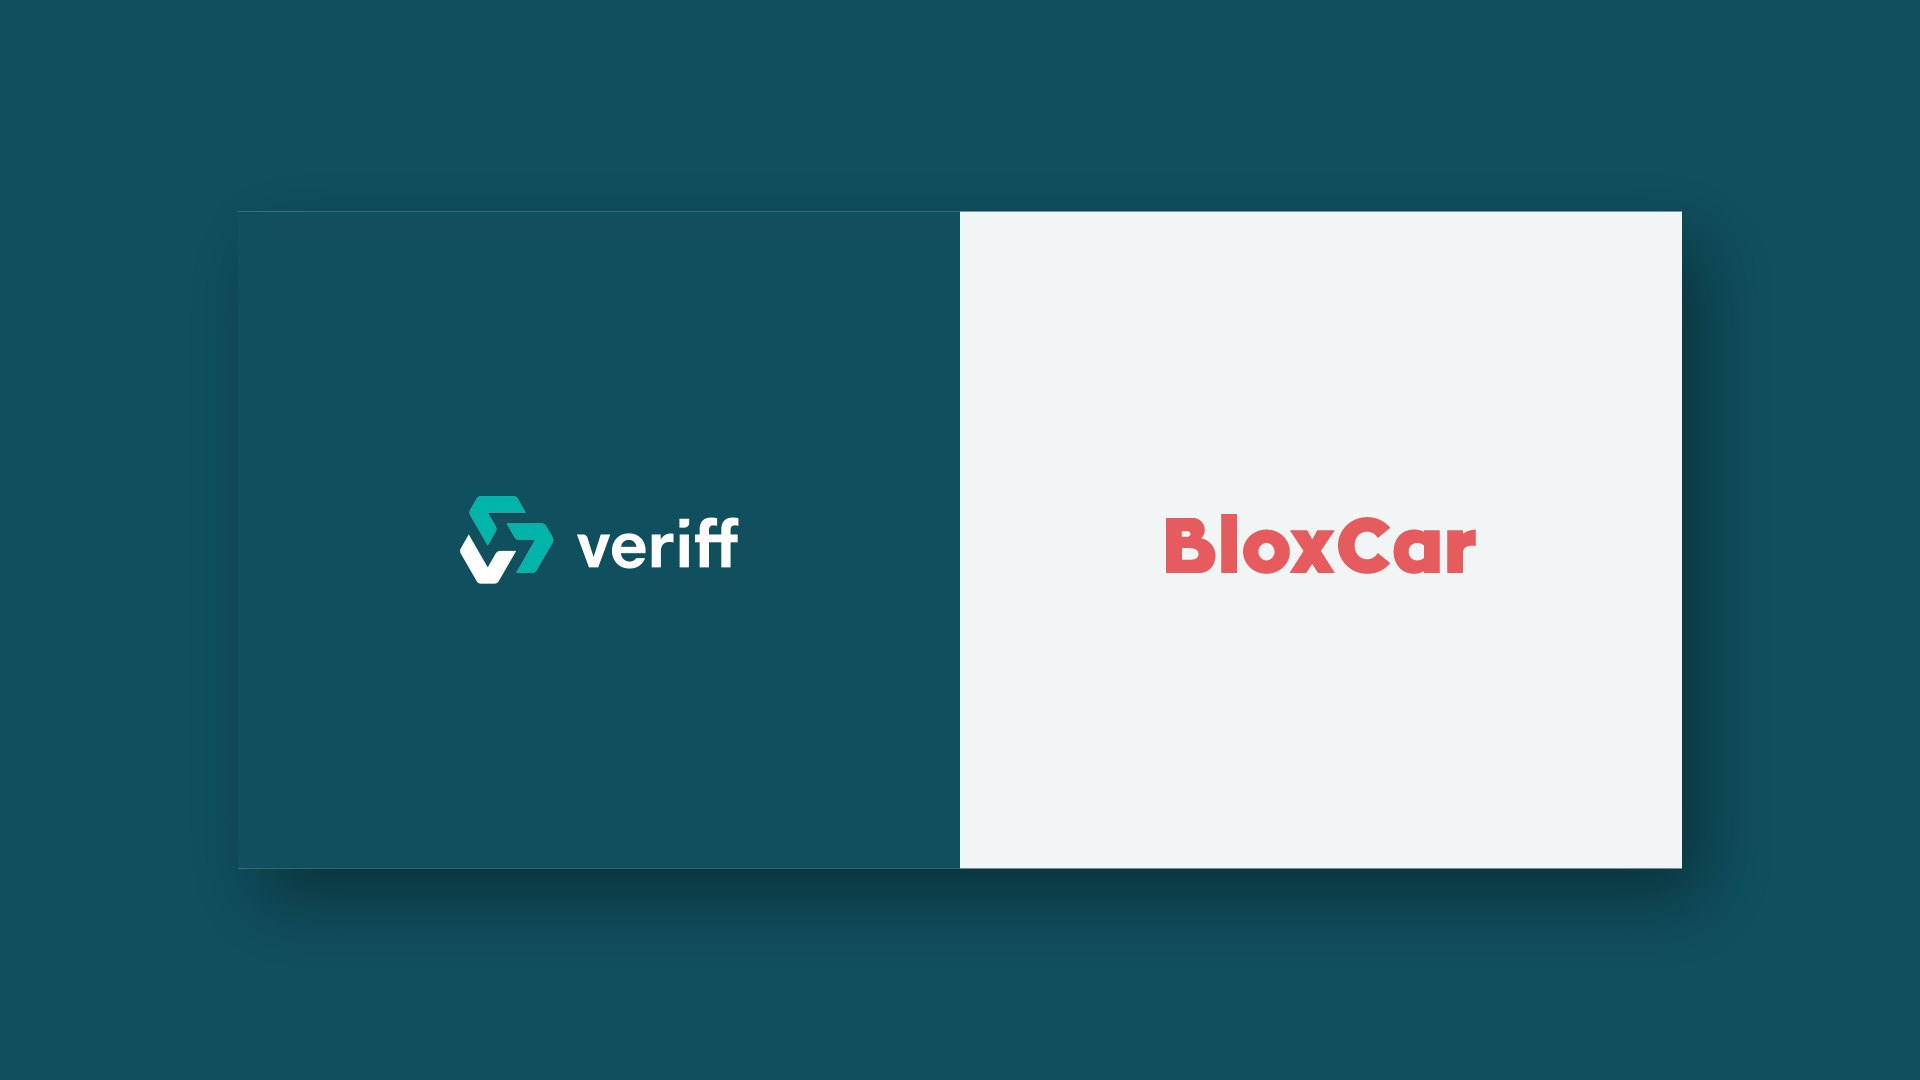 Veriff partners up with car-sharing service, BloxCar